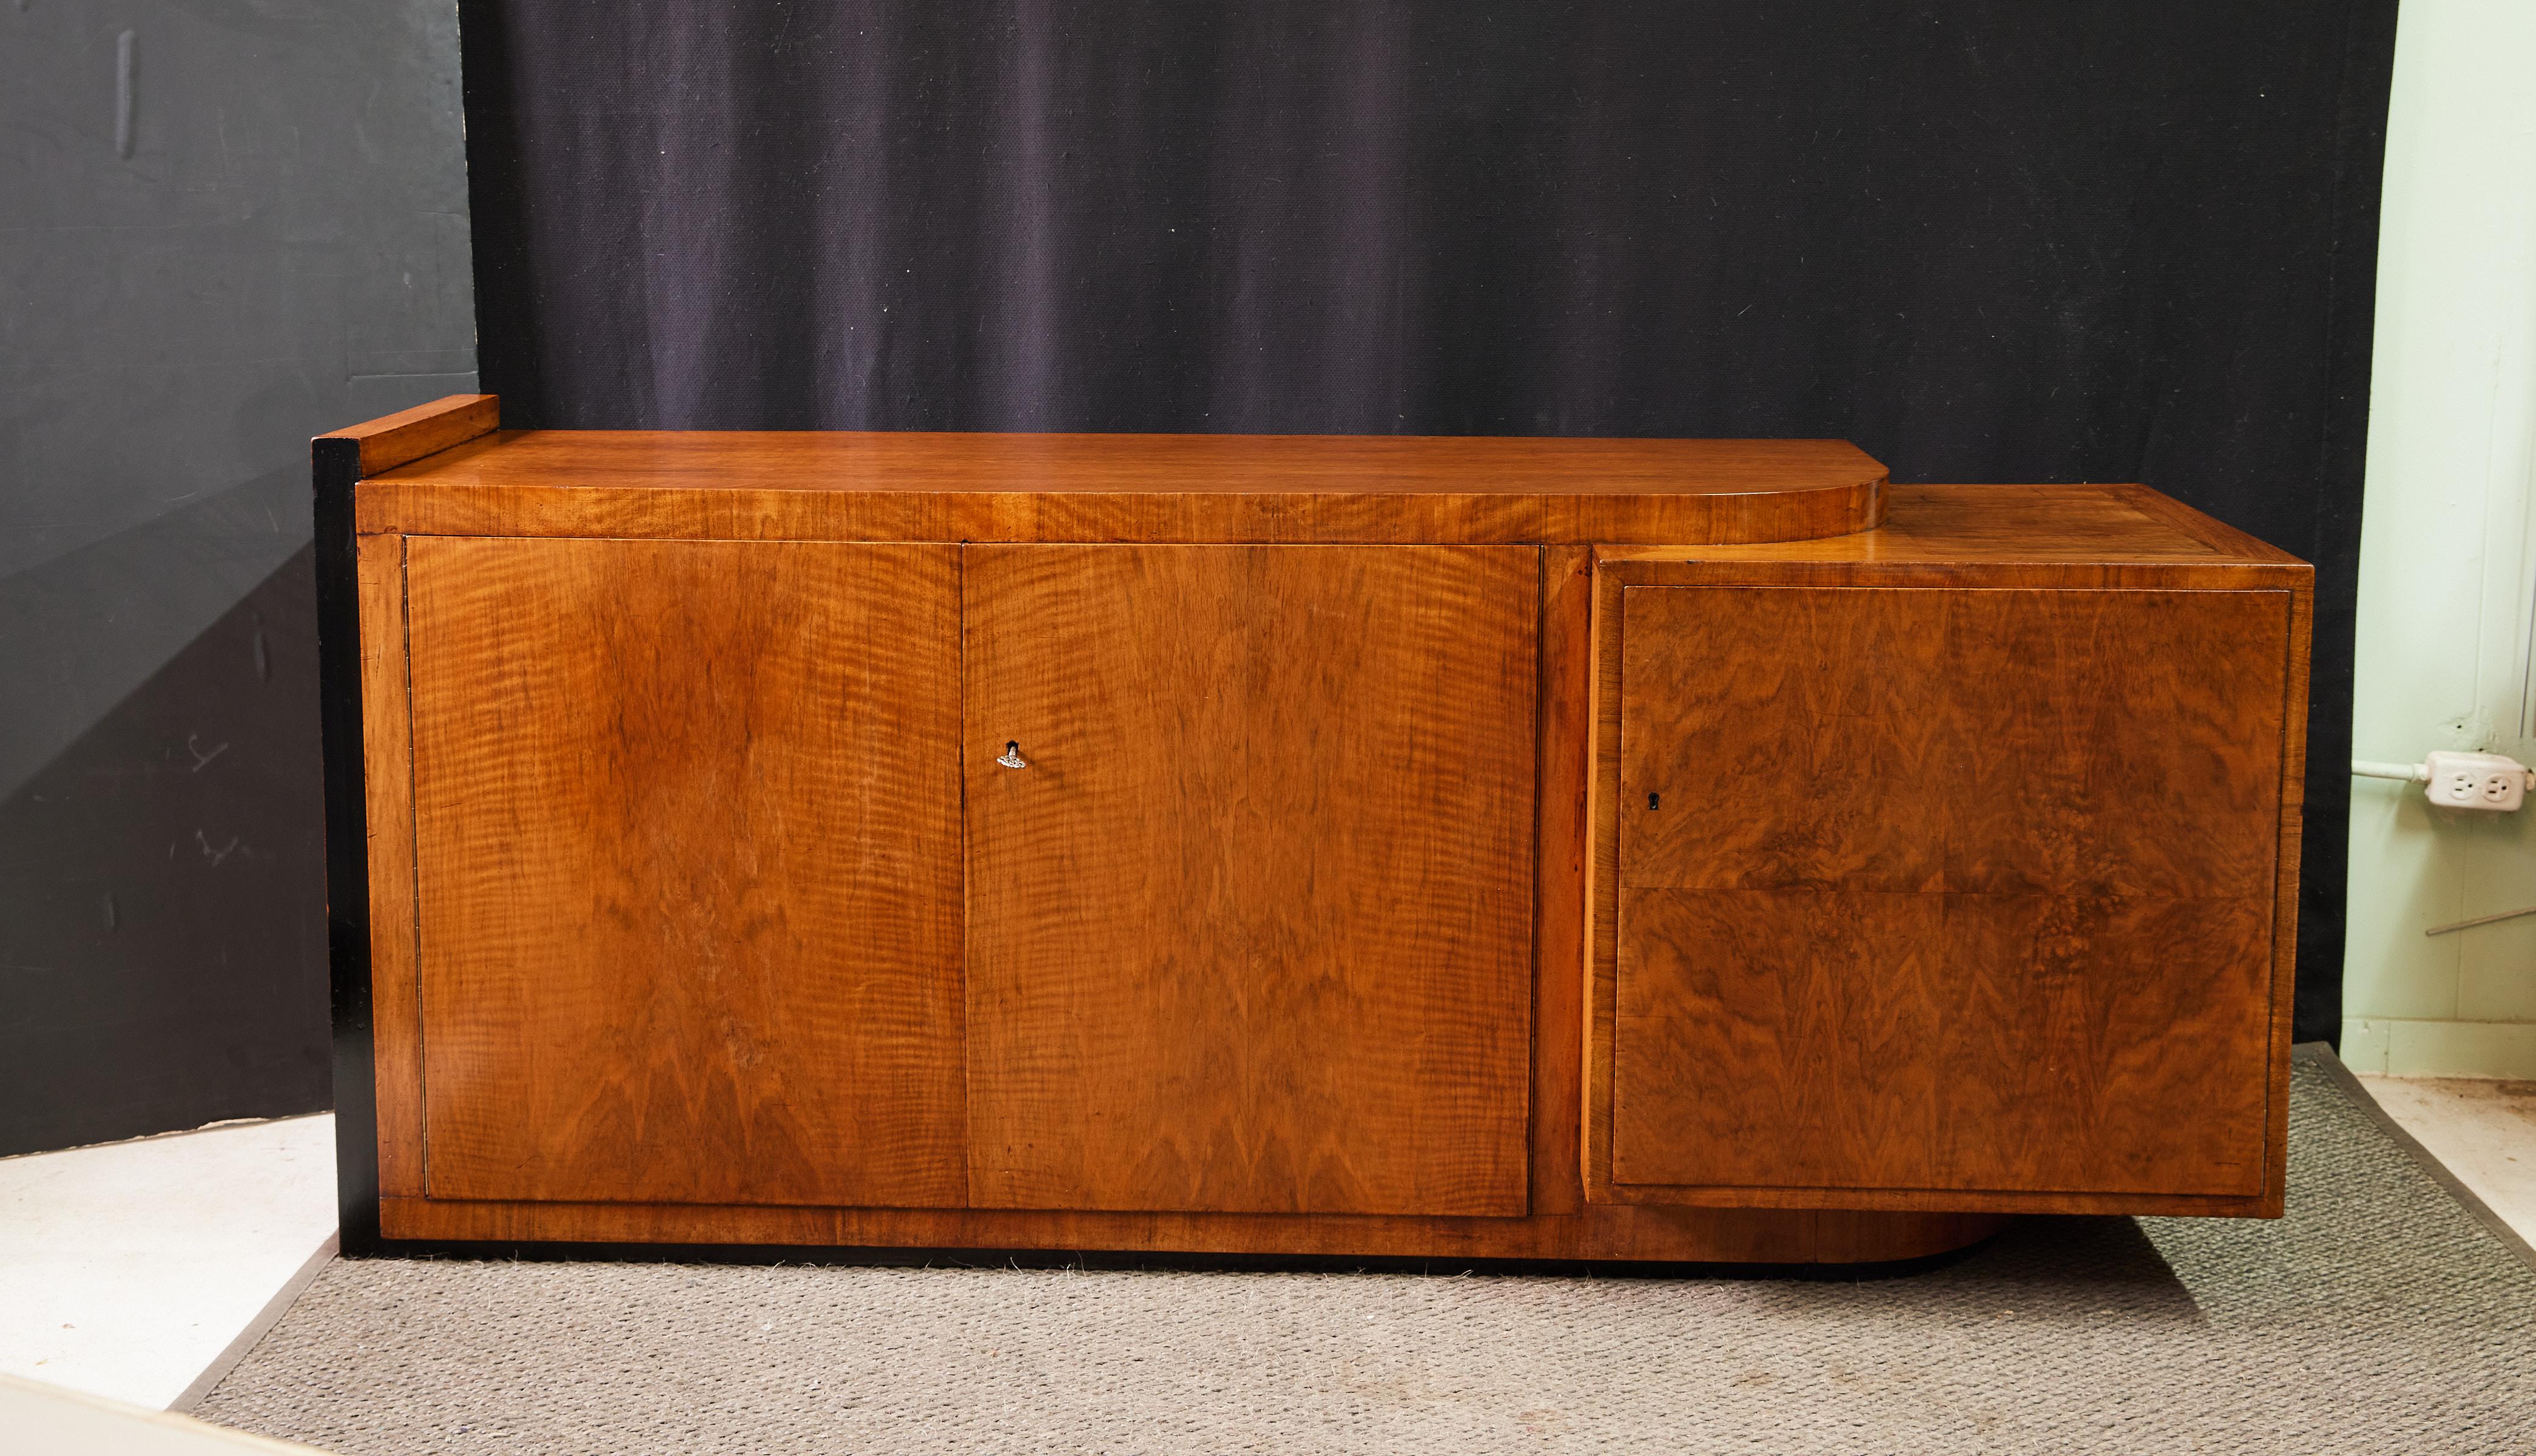 Early 20th century Art Deco period credenza of an impressive asymmetrical form and veneered in burl walnut. The primary case holds a flush cabinet with double doors that open to a storage cavity with a wide shelf below a pair of felt-lined drawers